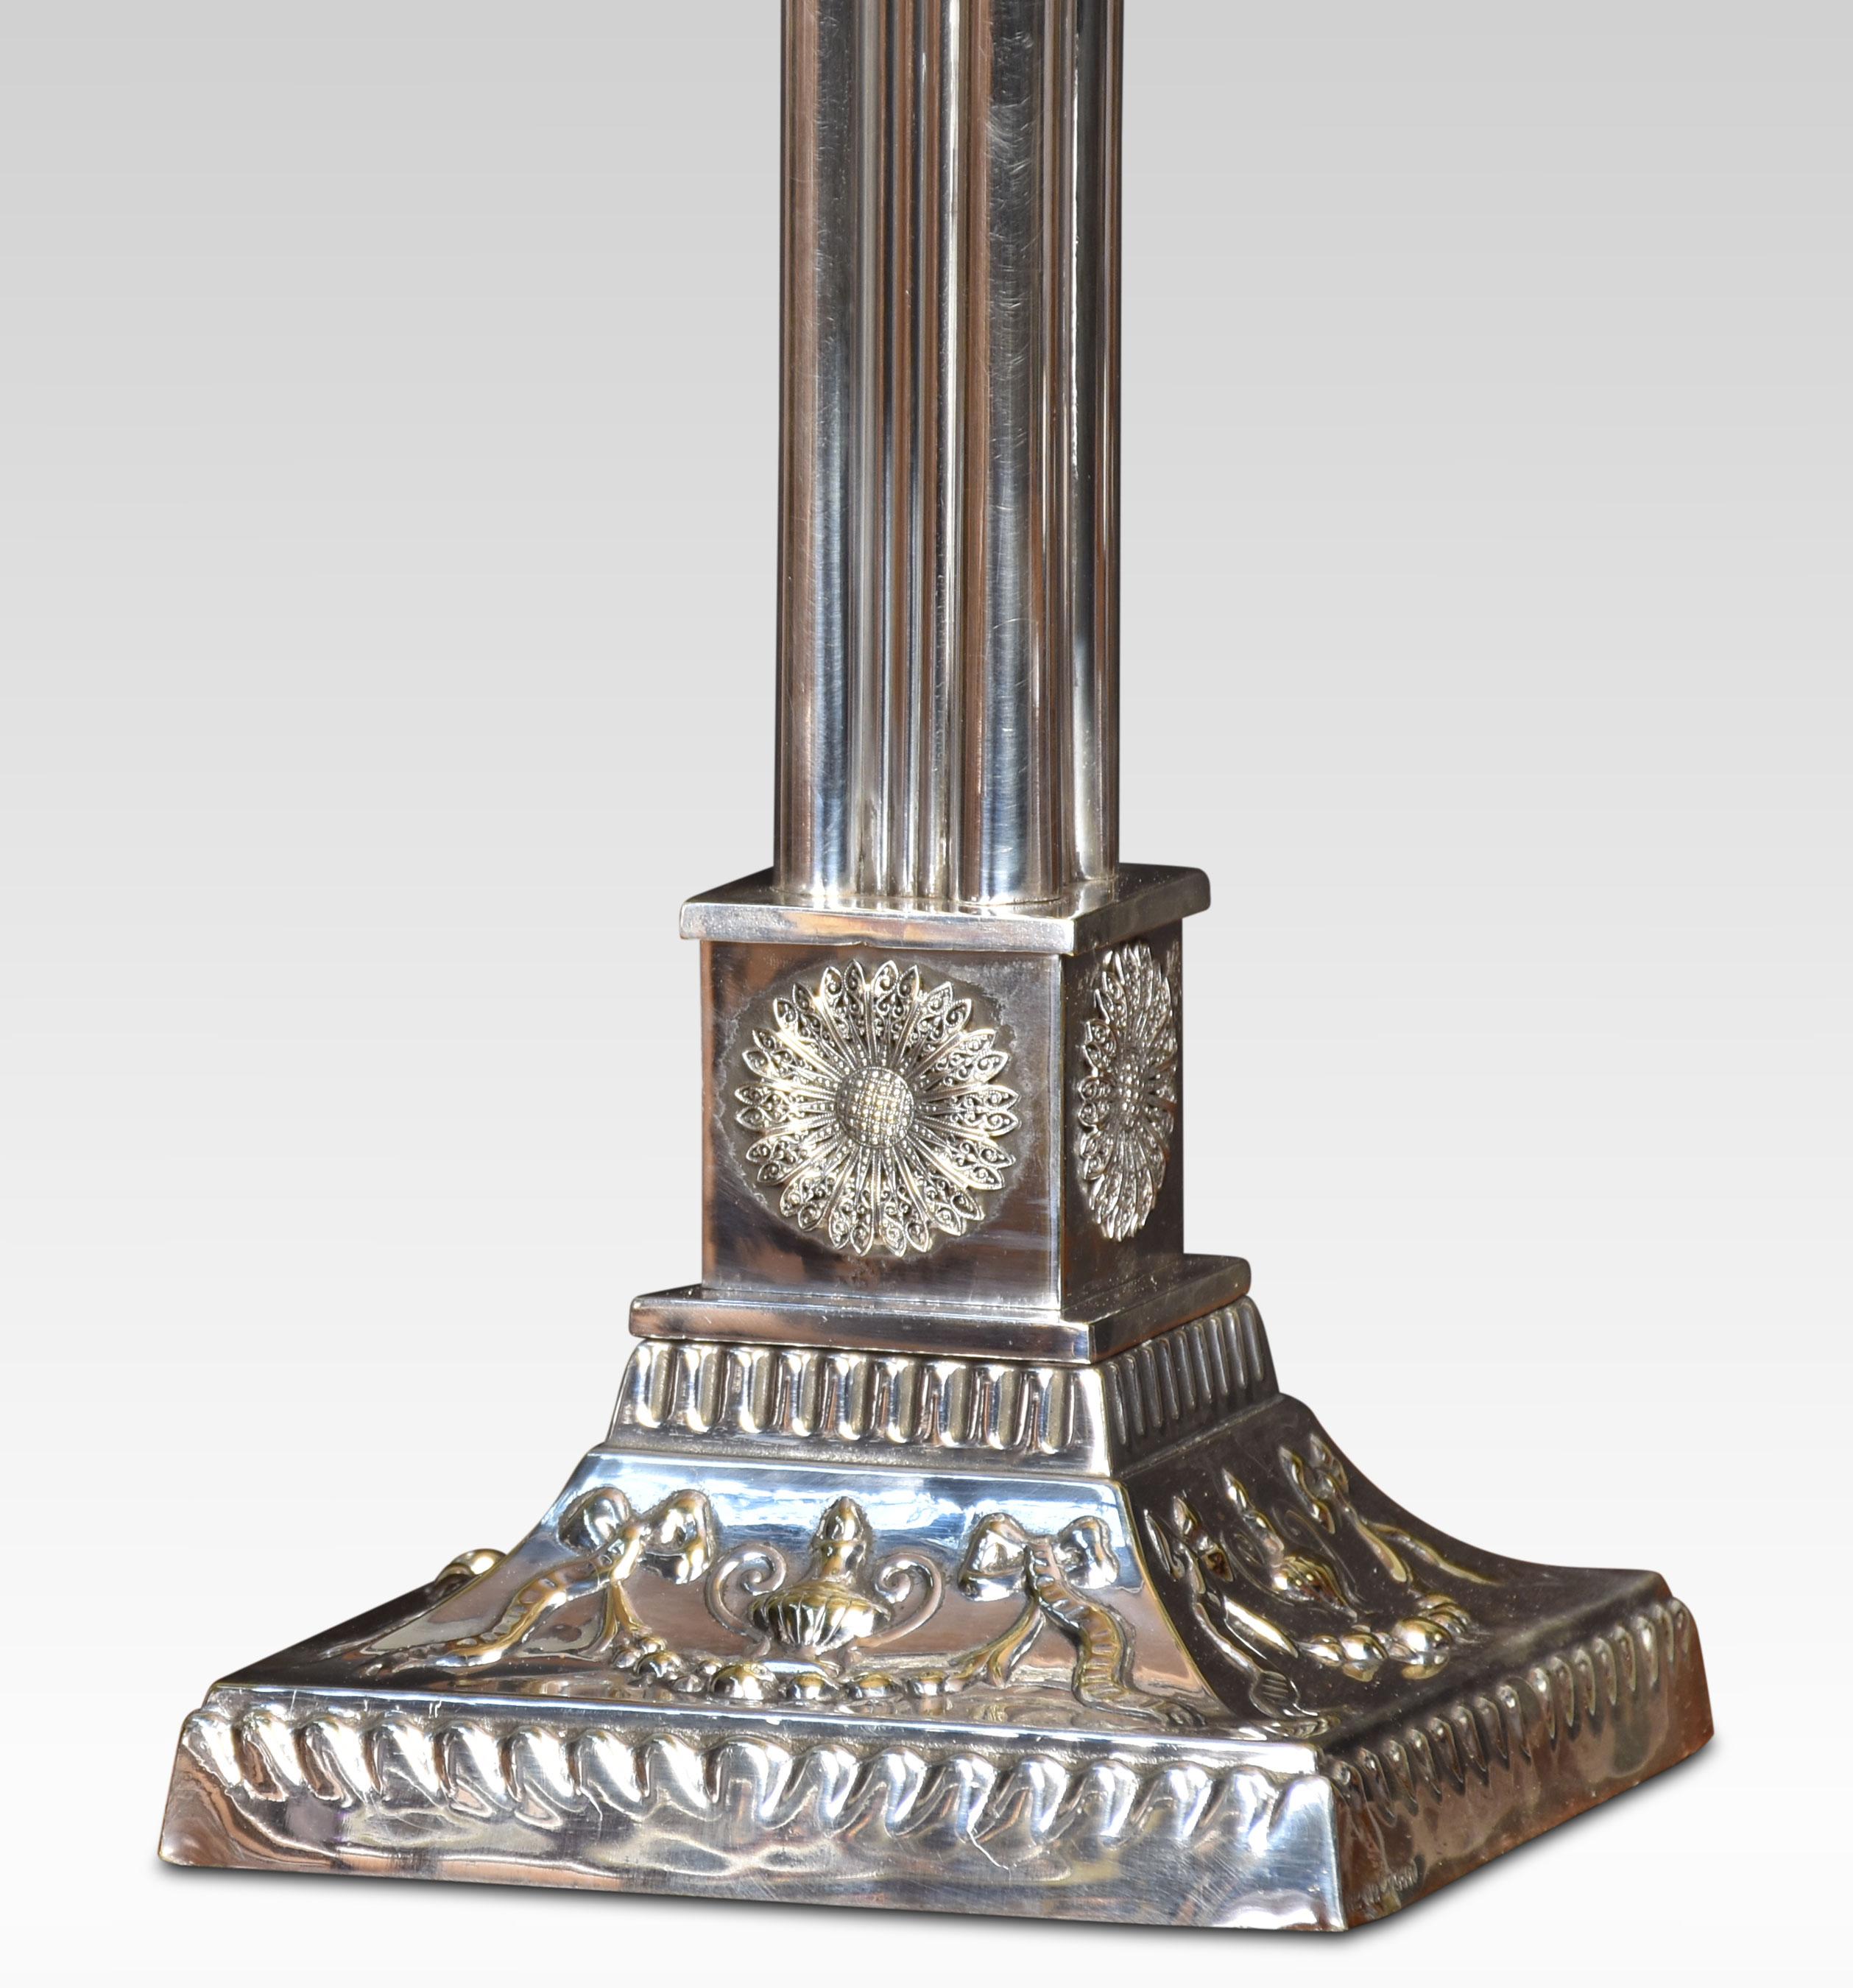 Silverplate table lamp, having a Corinthian column on an embossed square base with flower head detail. The lamp has been rewired.
Dimensions
Height 17 inches
Width 6.5 inches
Depth 6.5 inches.